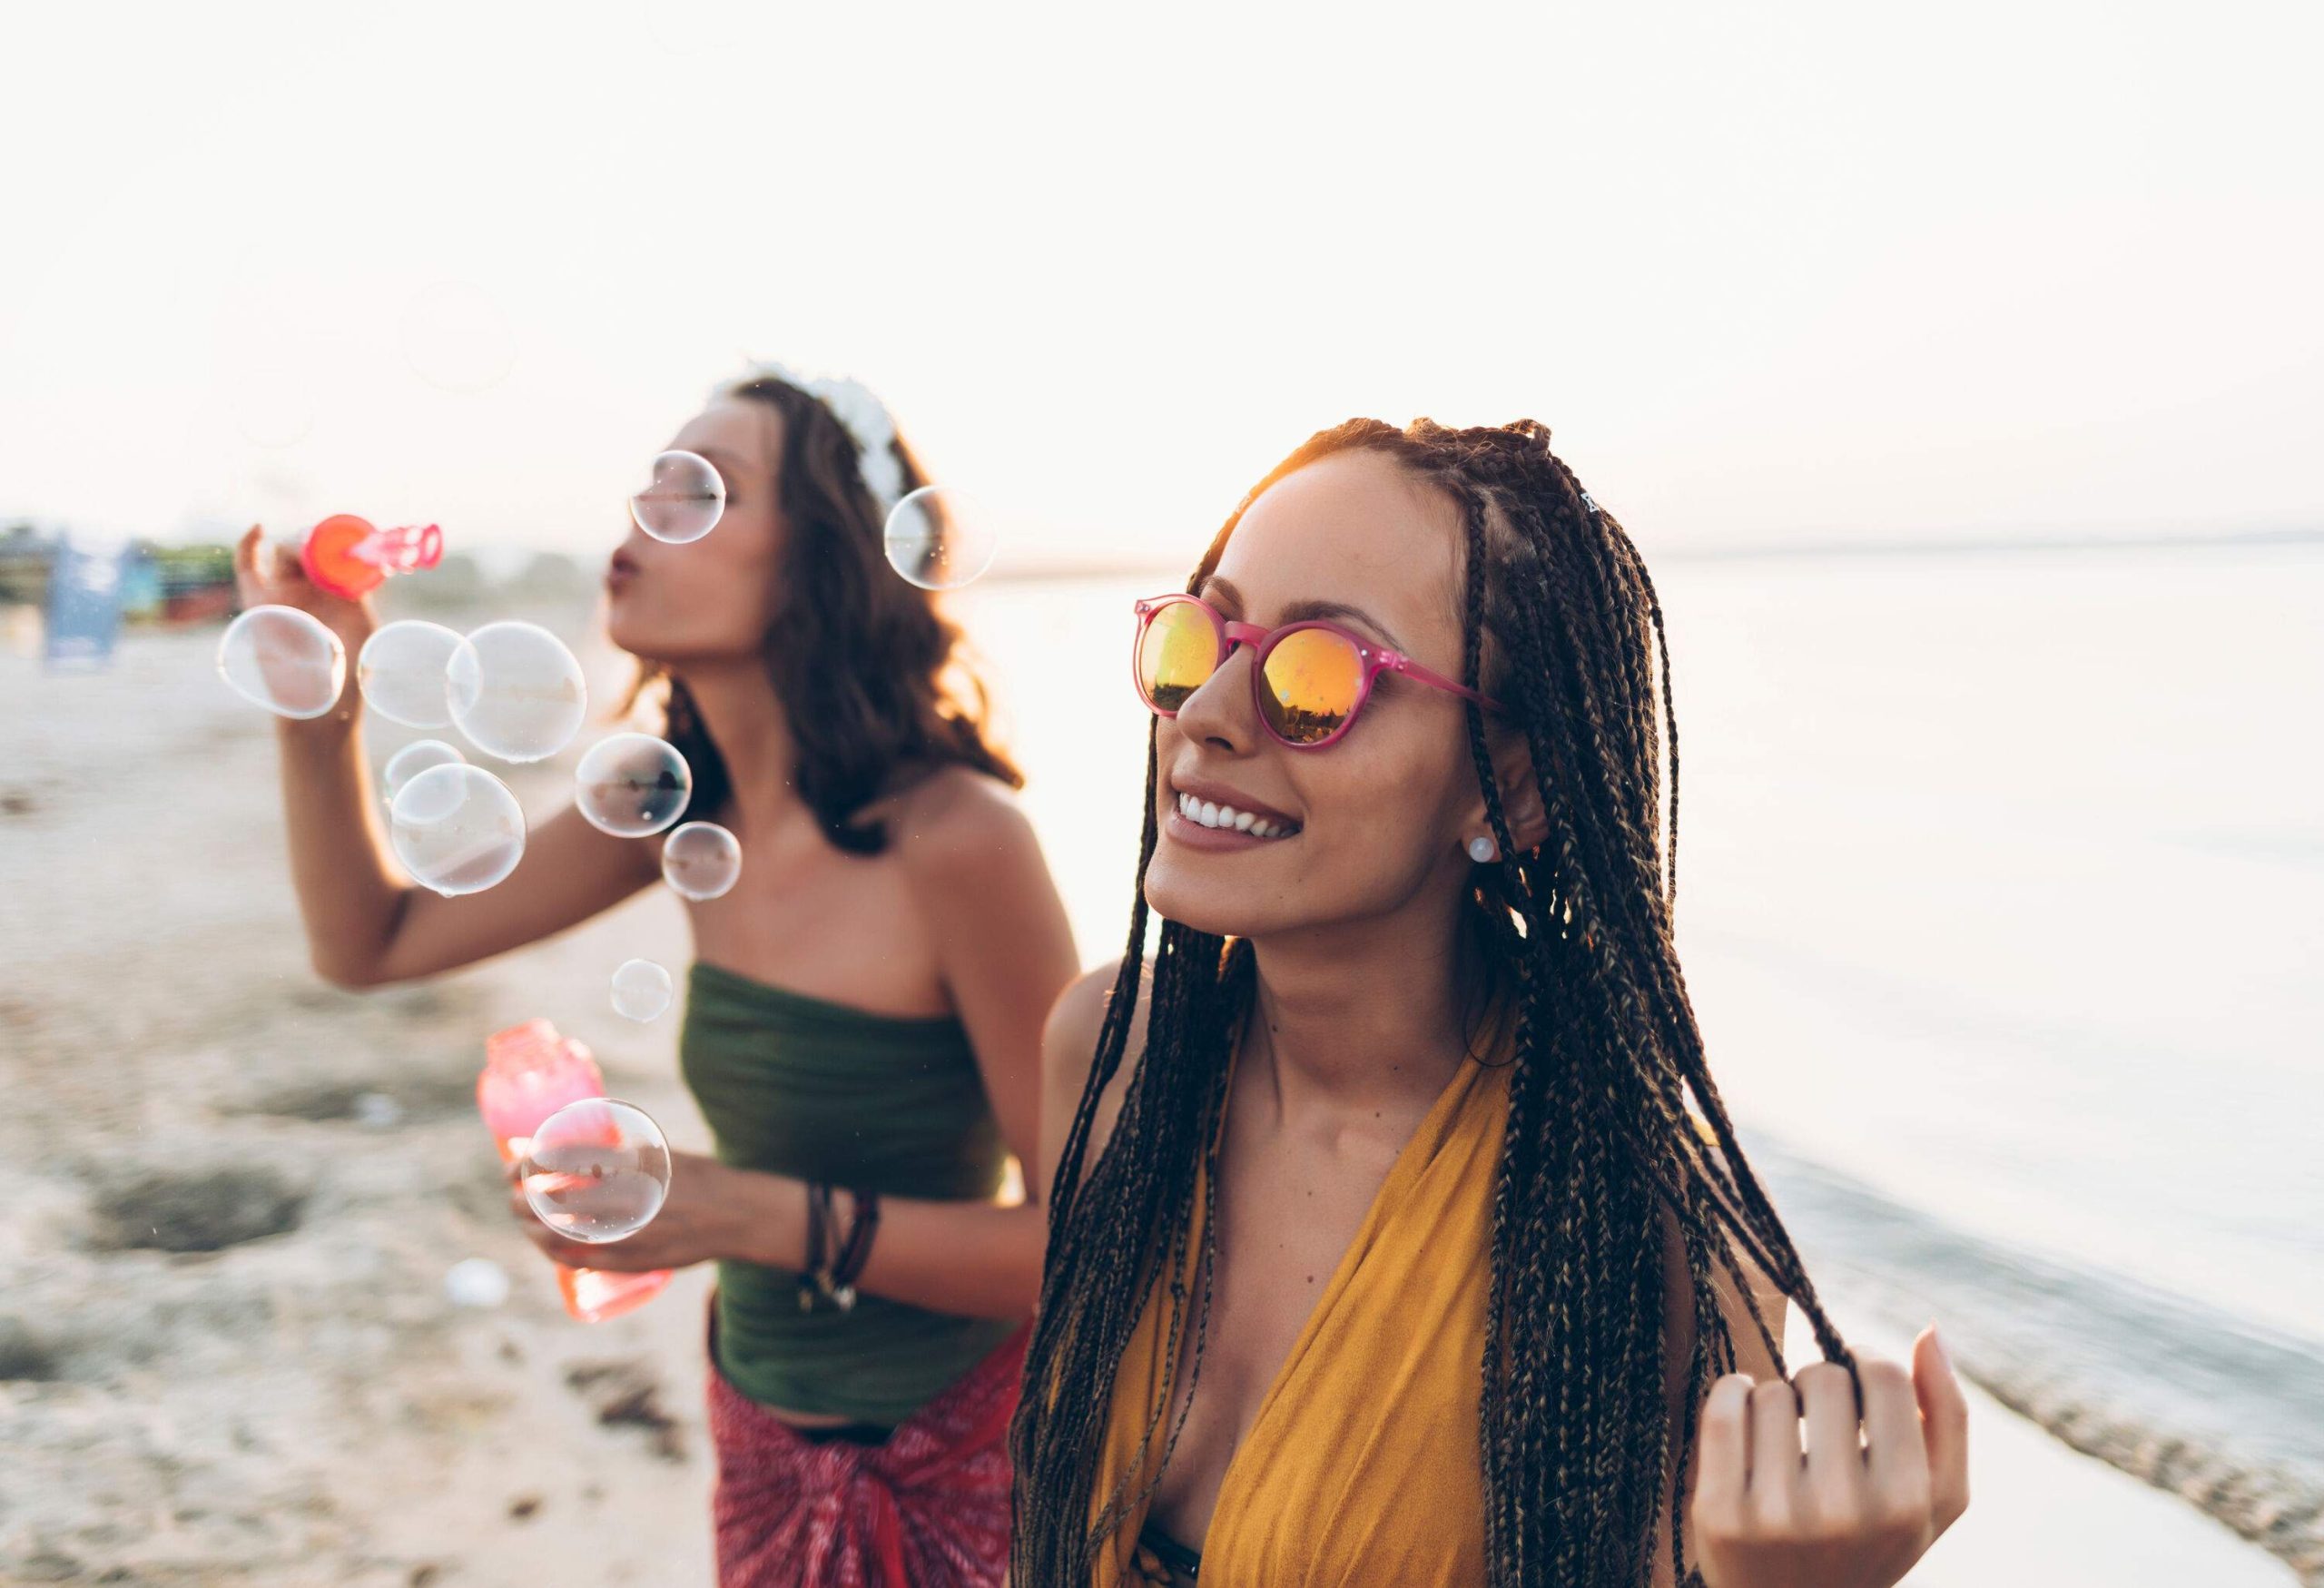 Young women on the beach, radiating joy and laughter, playfully blow bubbles.